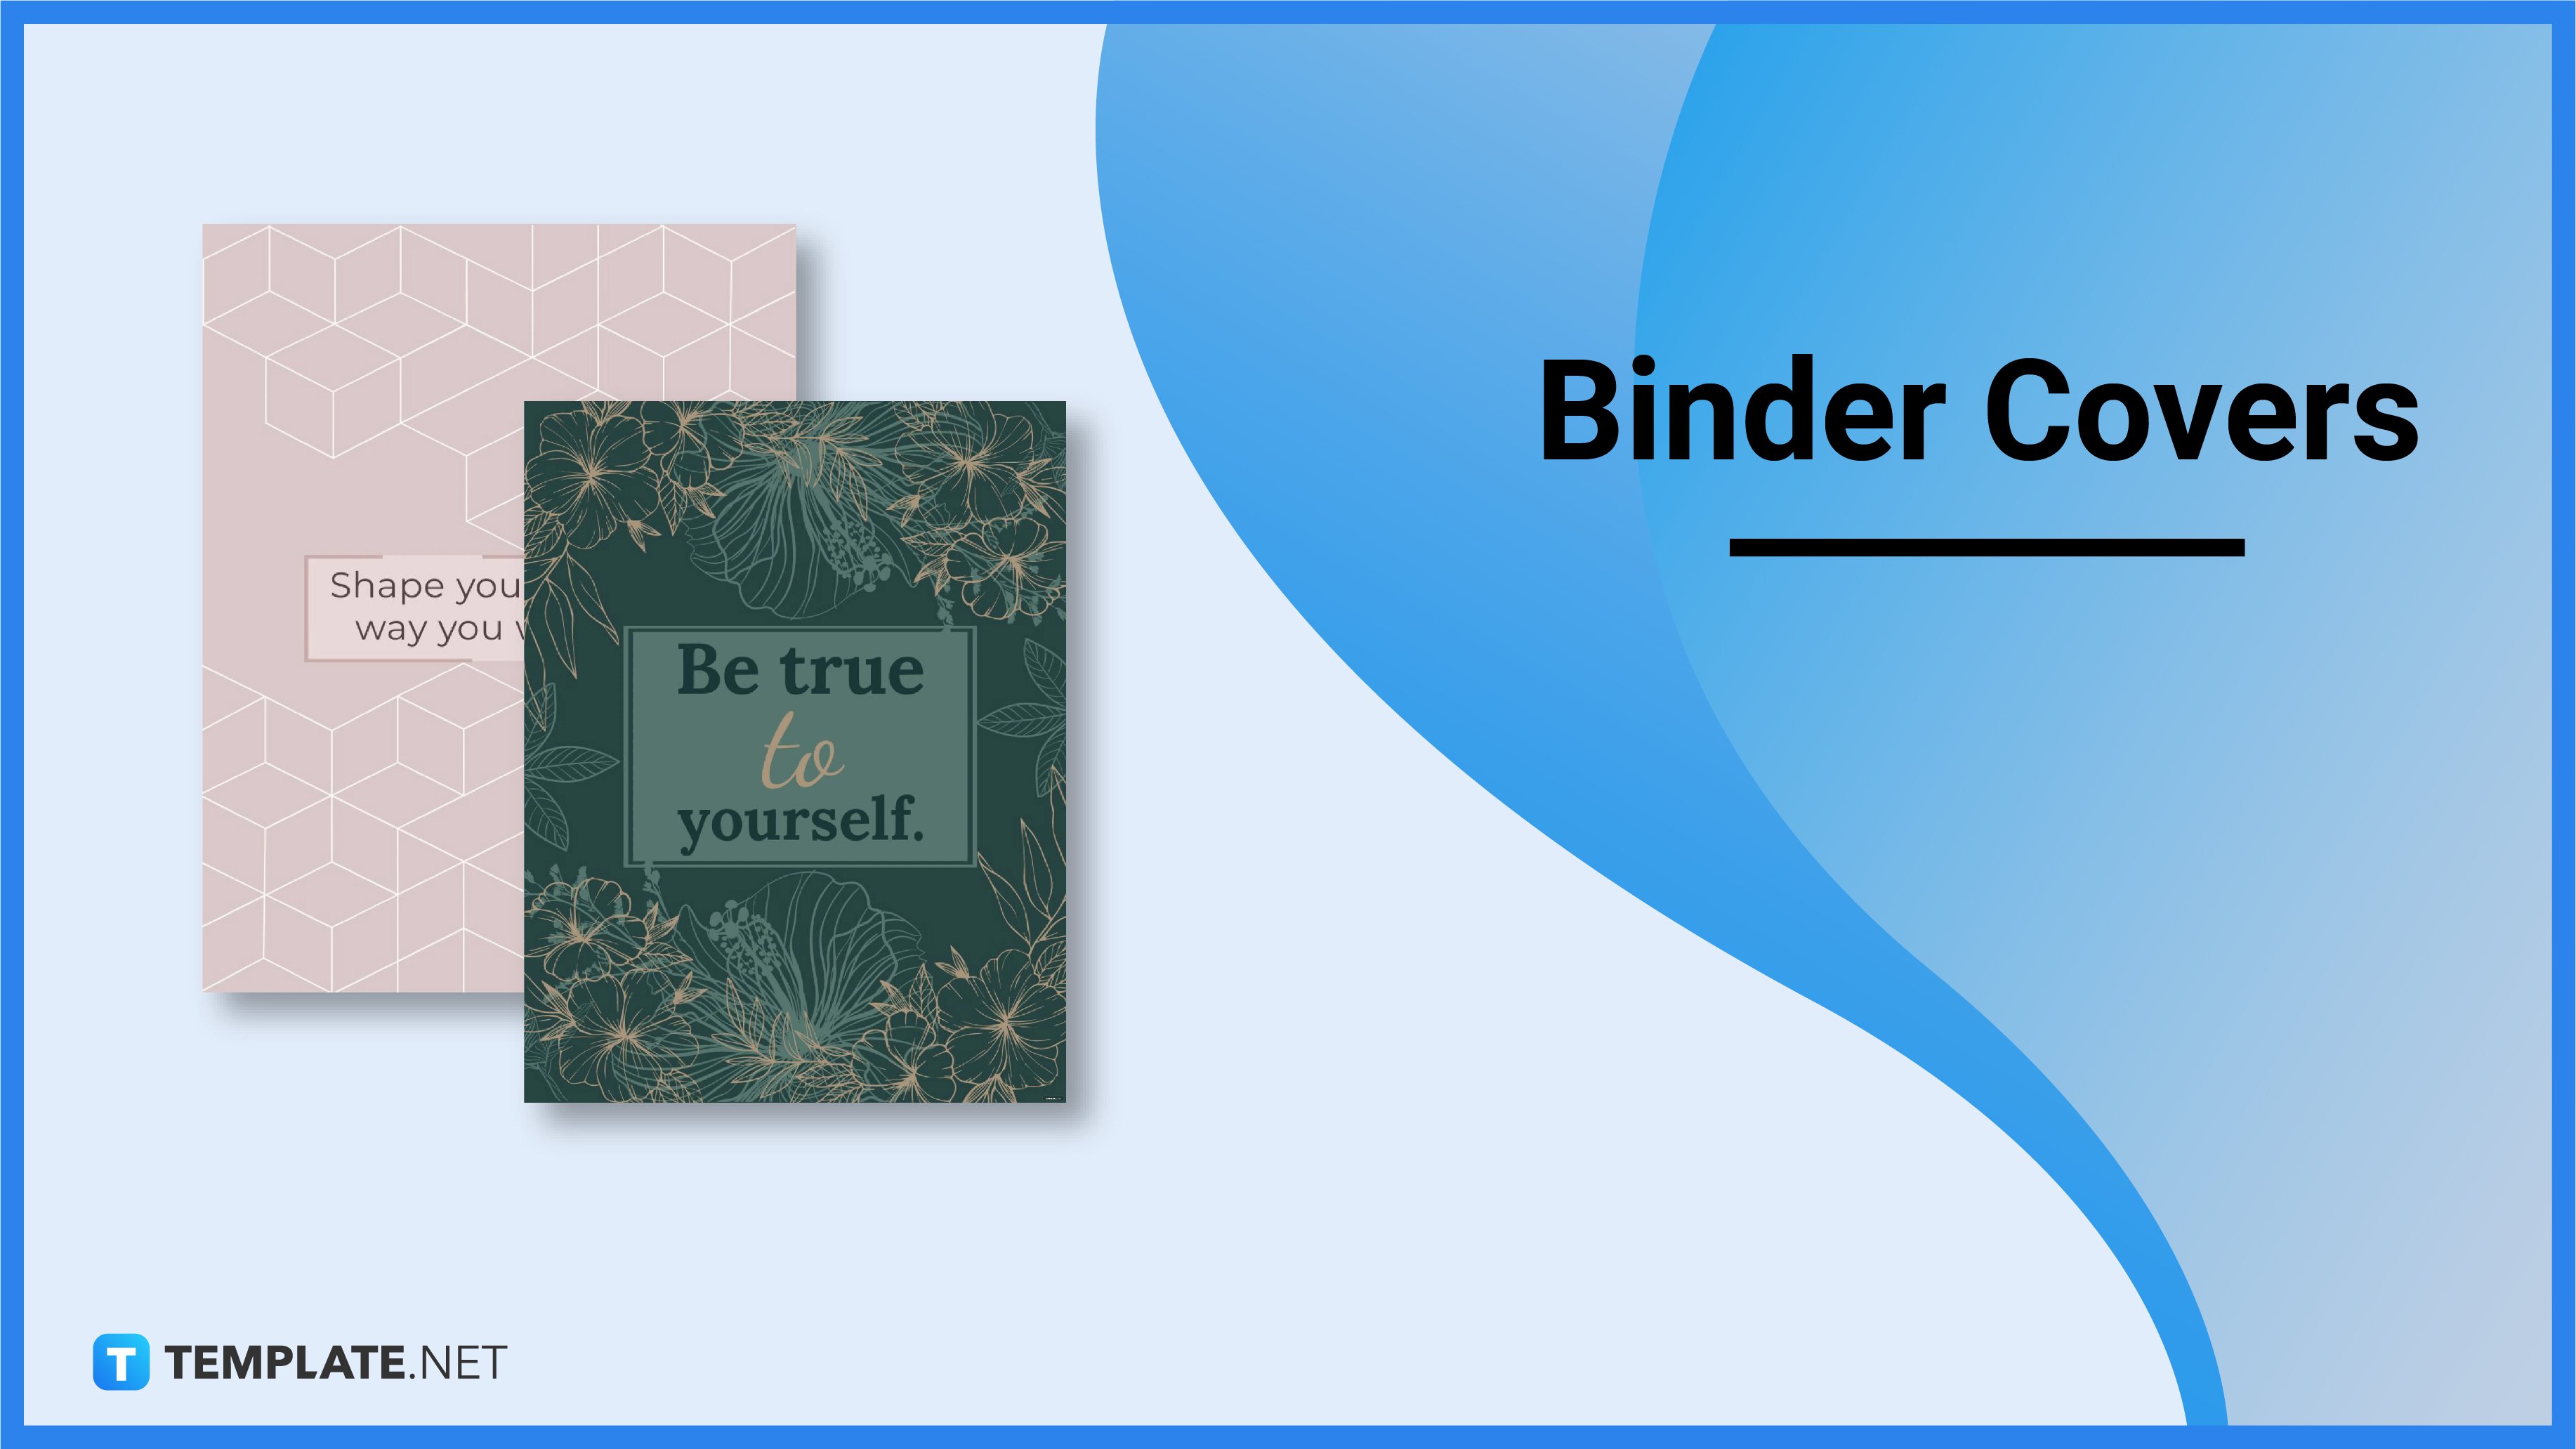 How To Make A Binder Cover In Word